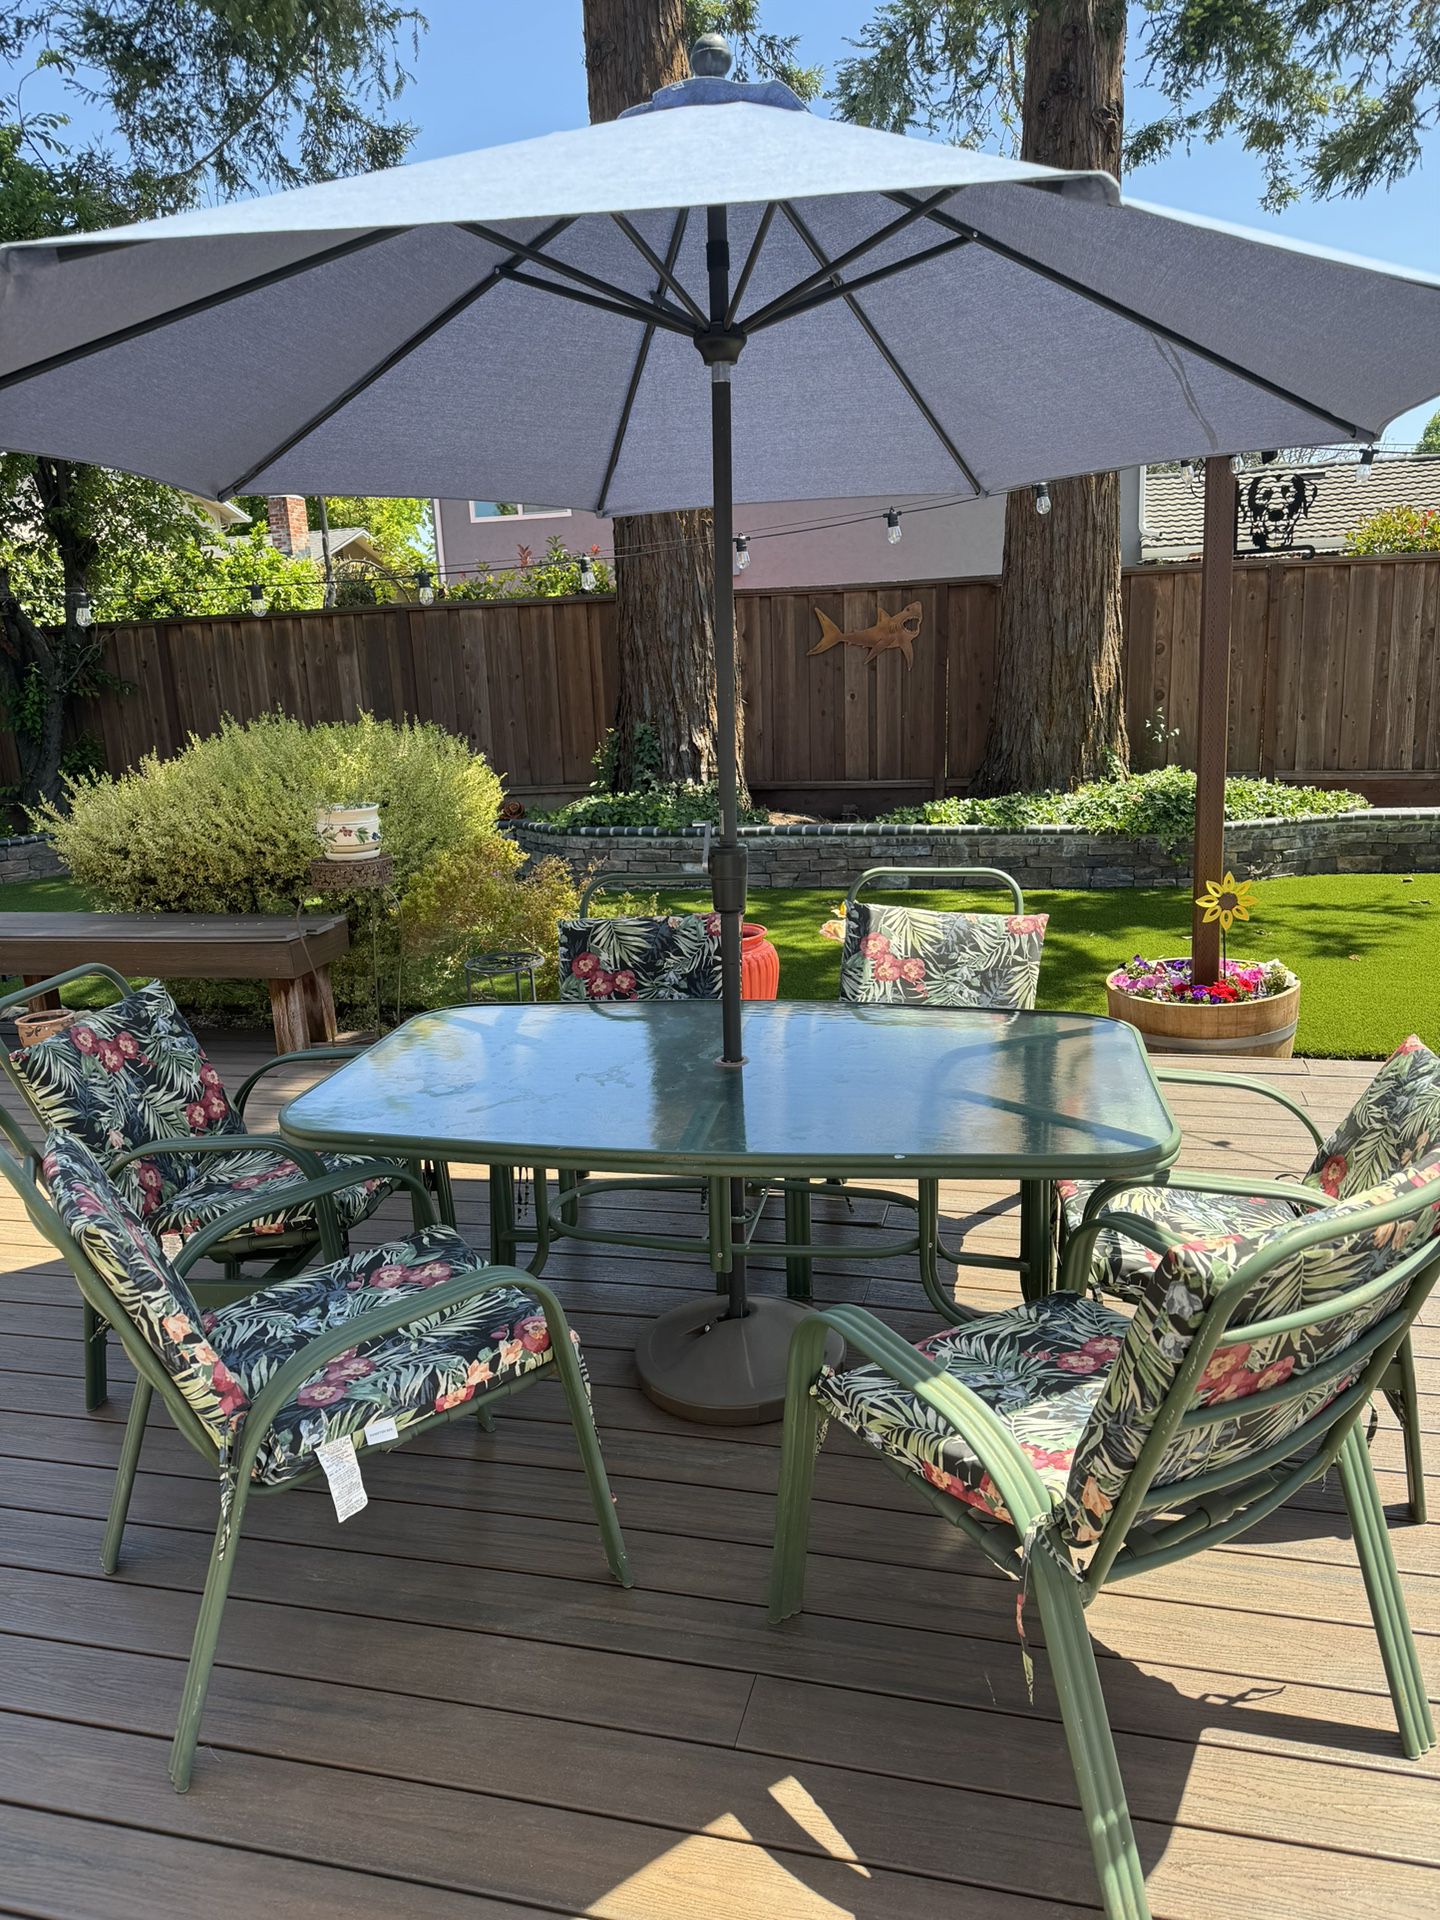 Patio Furniture With Furniture Pads, Umbrella And Umbrella Stand Included. 